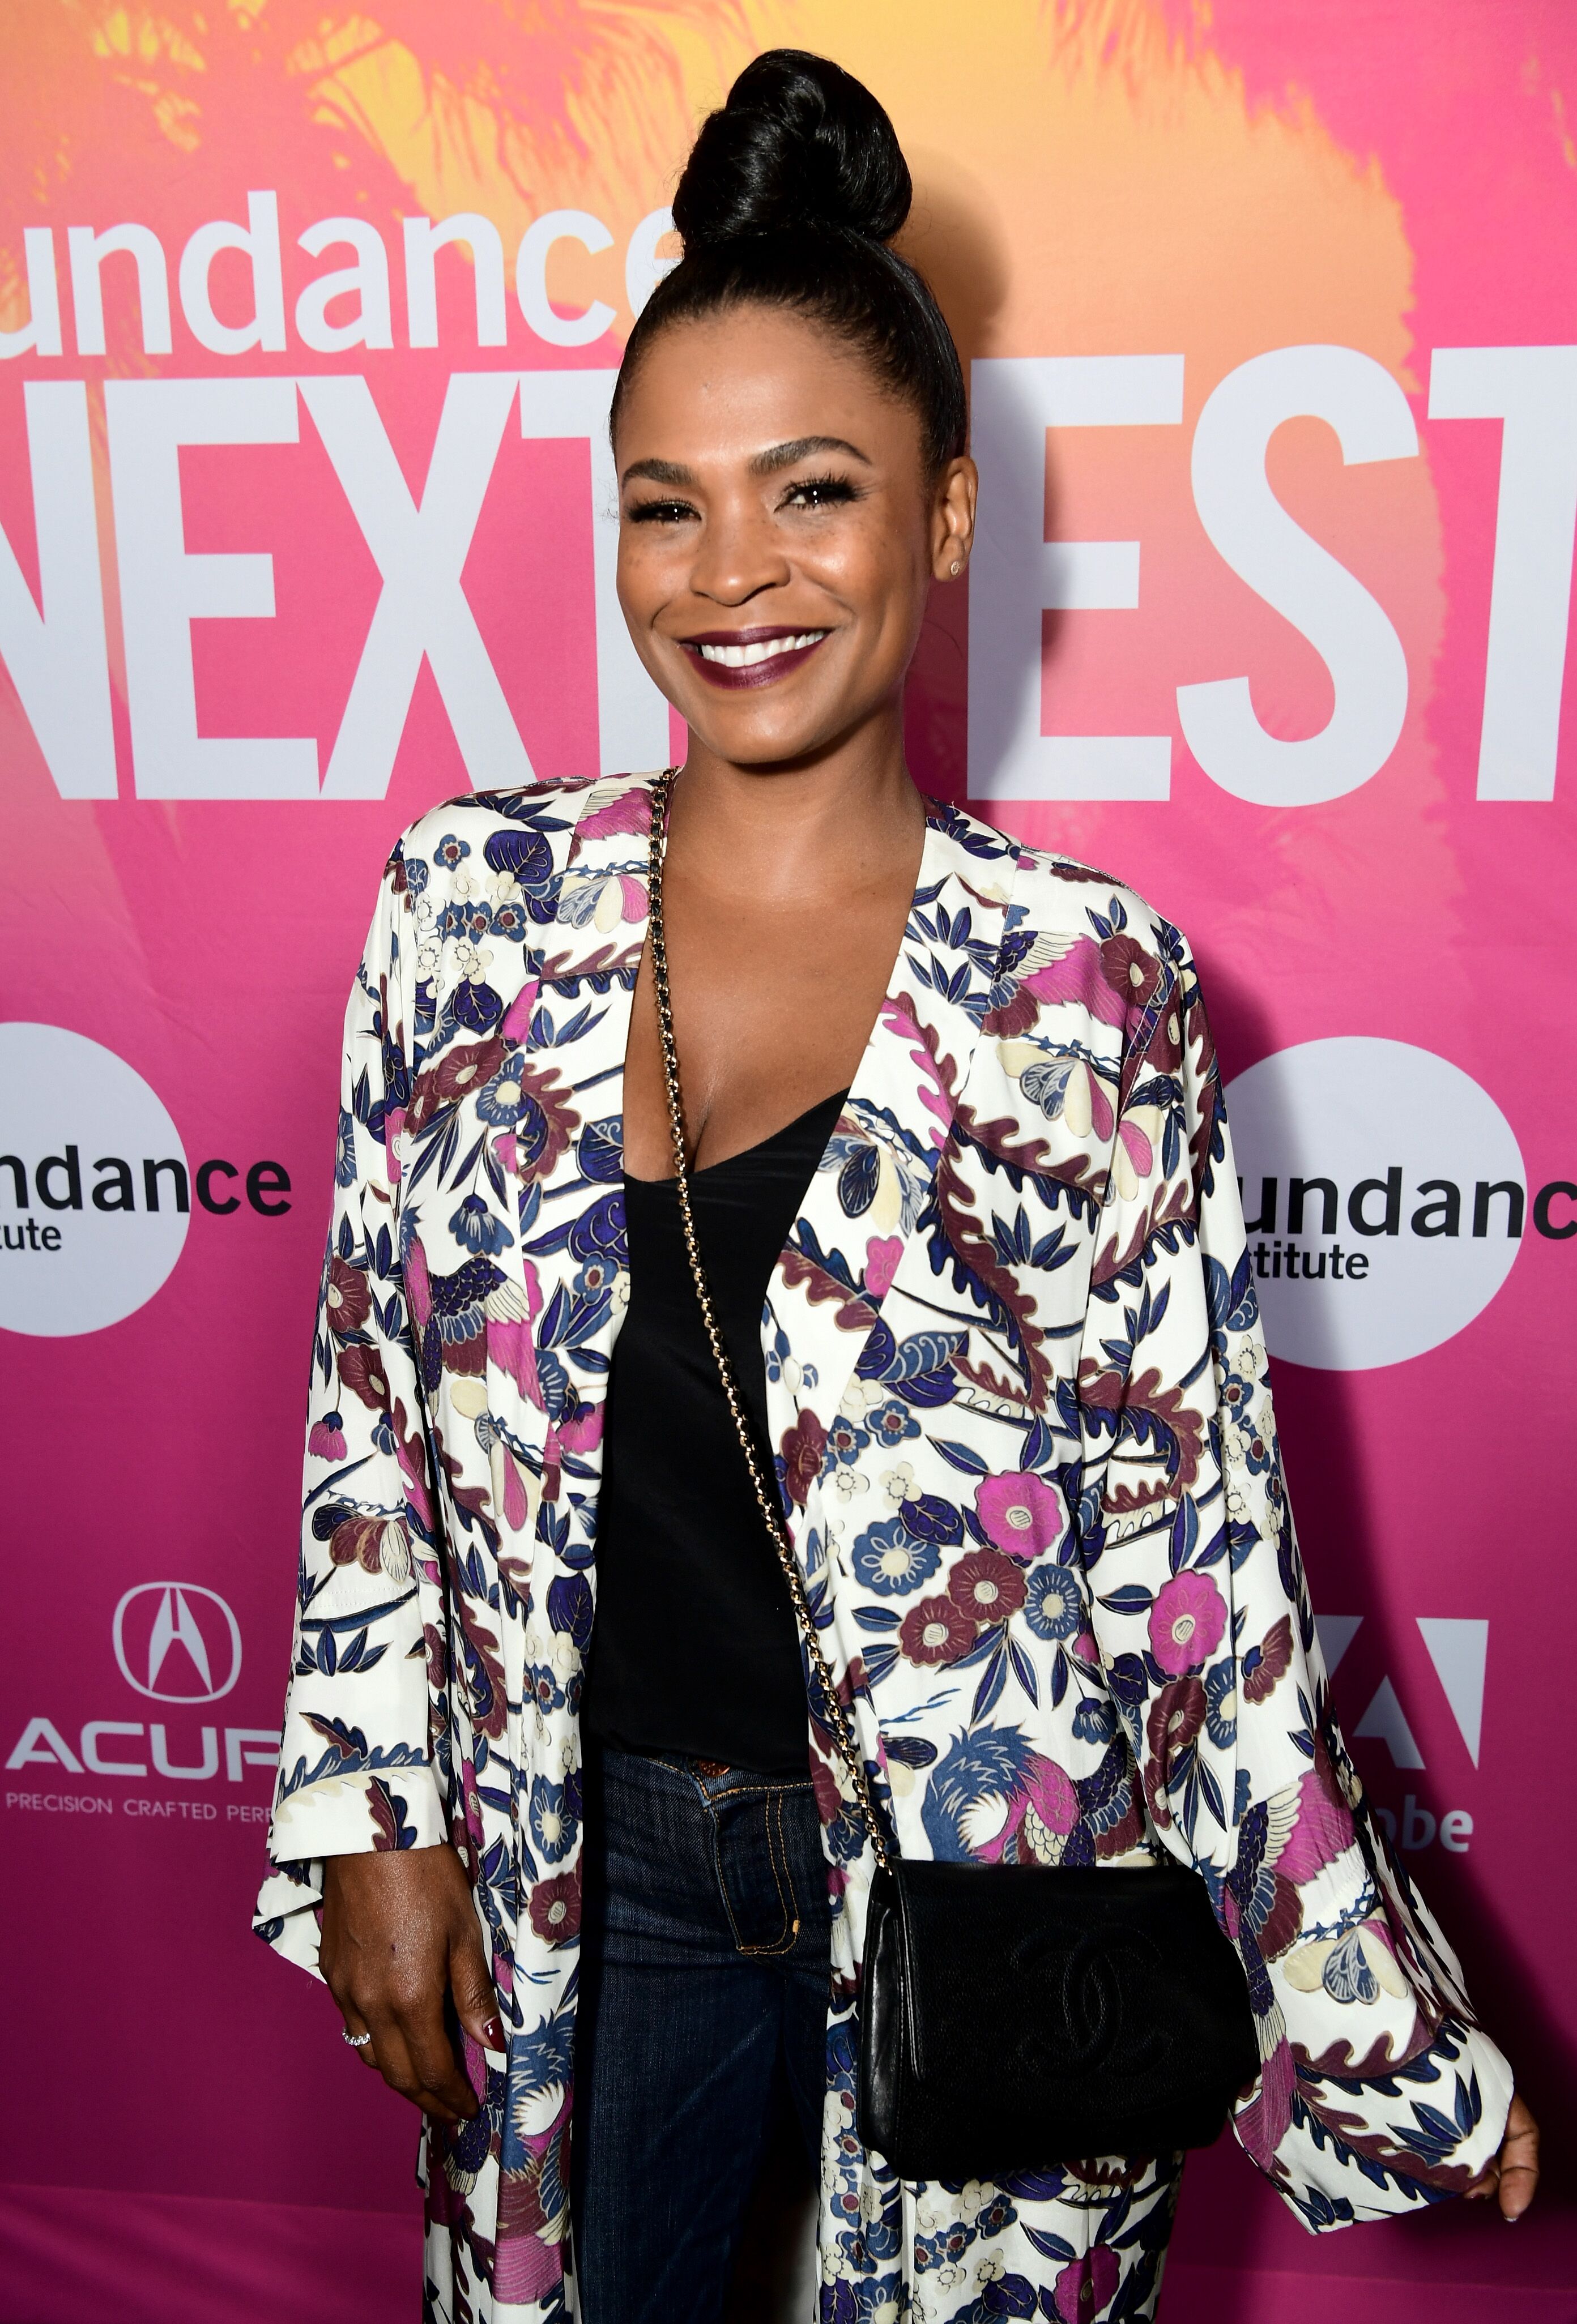 Actor Nia Long attends 2017 Sundance NEXT FEST at The Theater at The Ace Hotel on August 11, 2017 | Photo: Getty Images